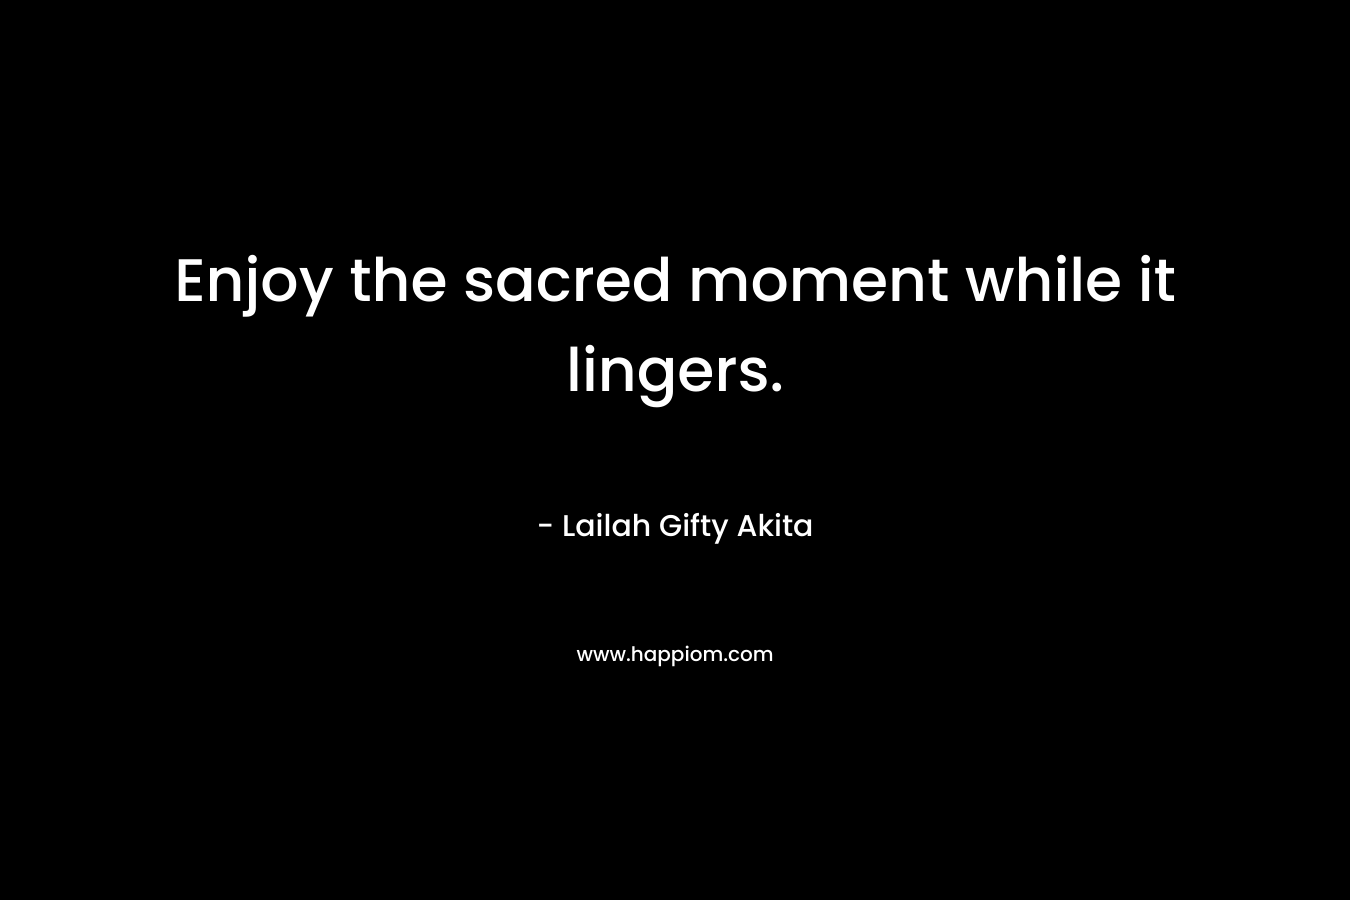 Enjoy the sacred moment while it lingers.